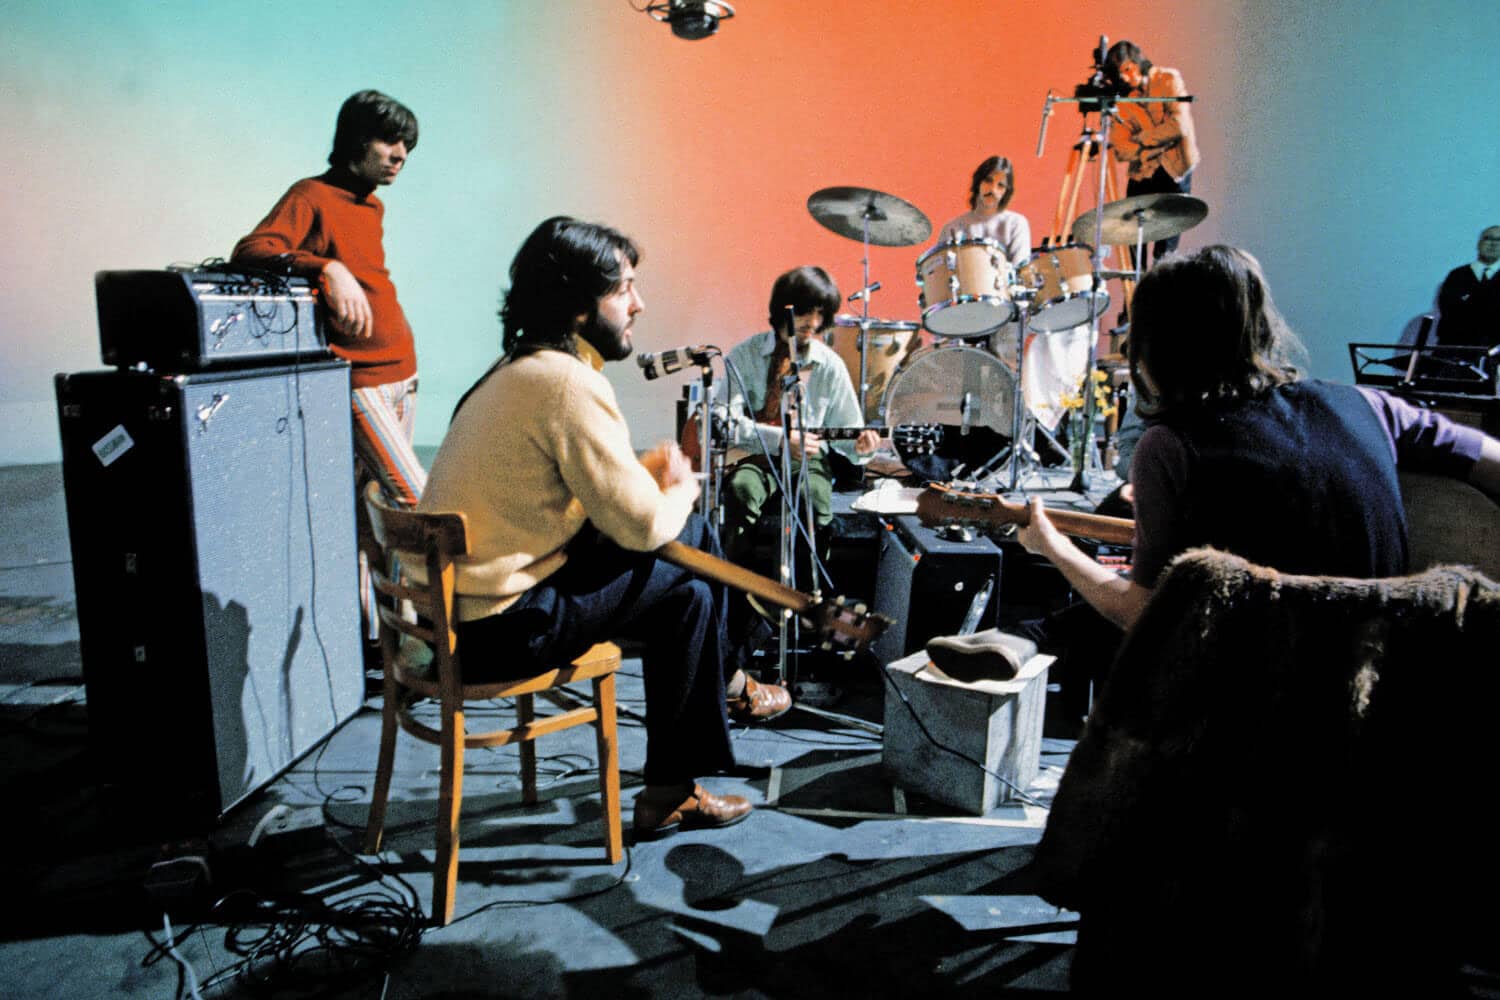 The%20Beatles%20during%20the%20Get%20Back/Let%20It%20Be%20sessions,%20January%201969%20–%20The%20%20Beatles%20Bible